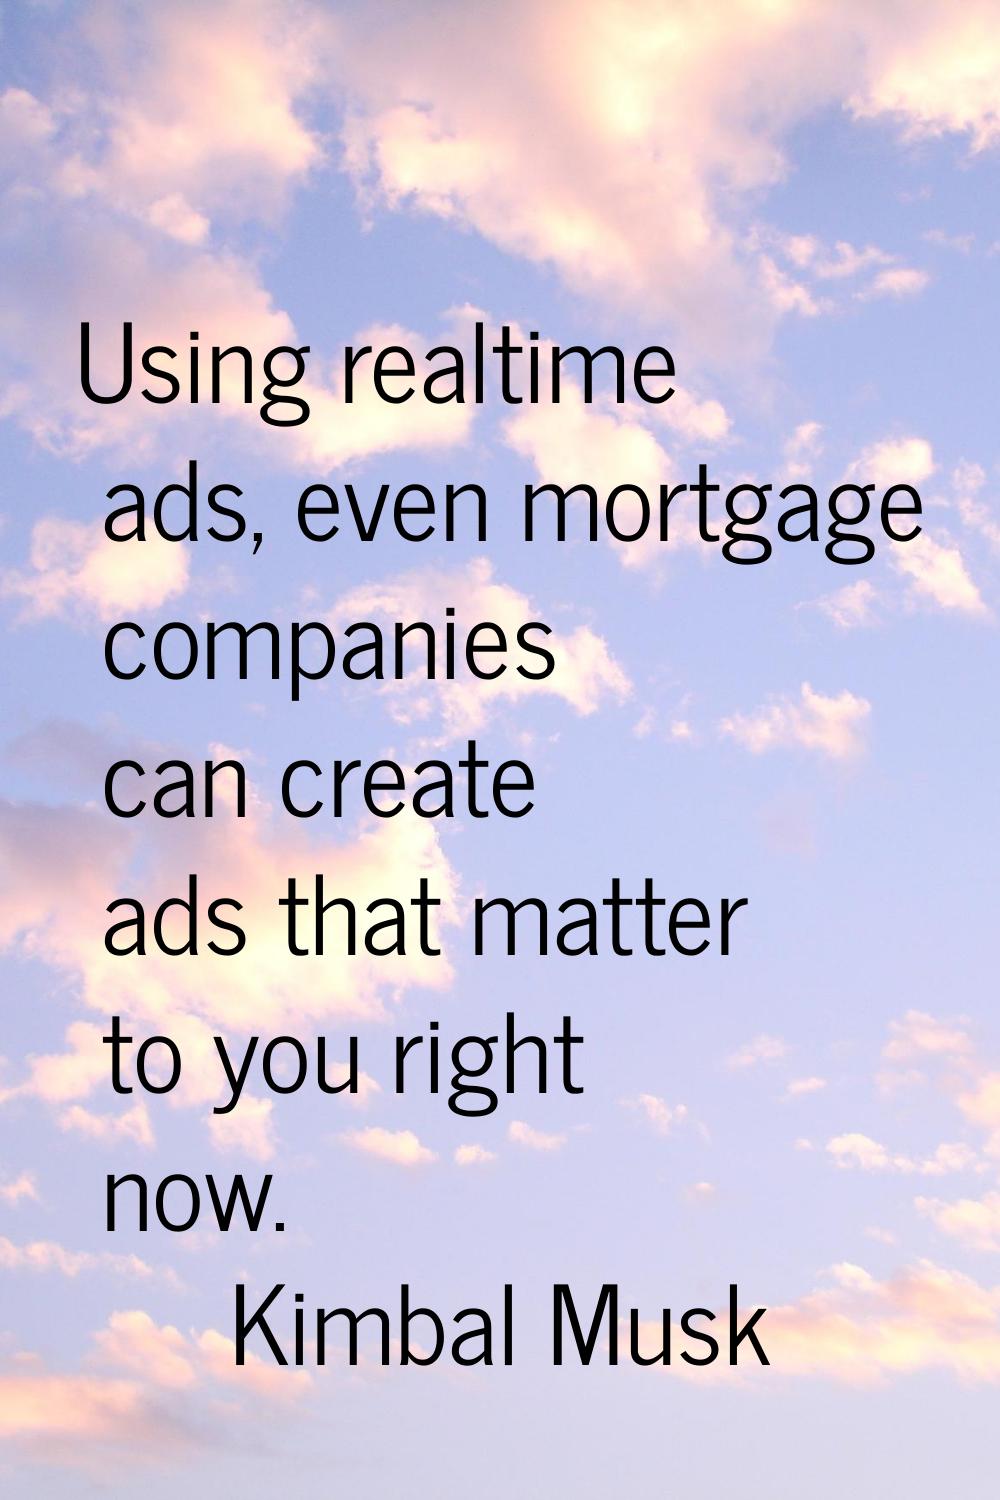 Using realtime ads, even mortgage companies can create ads that matter to you right now.